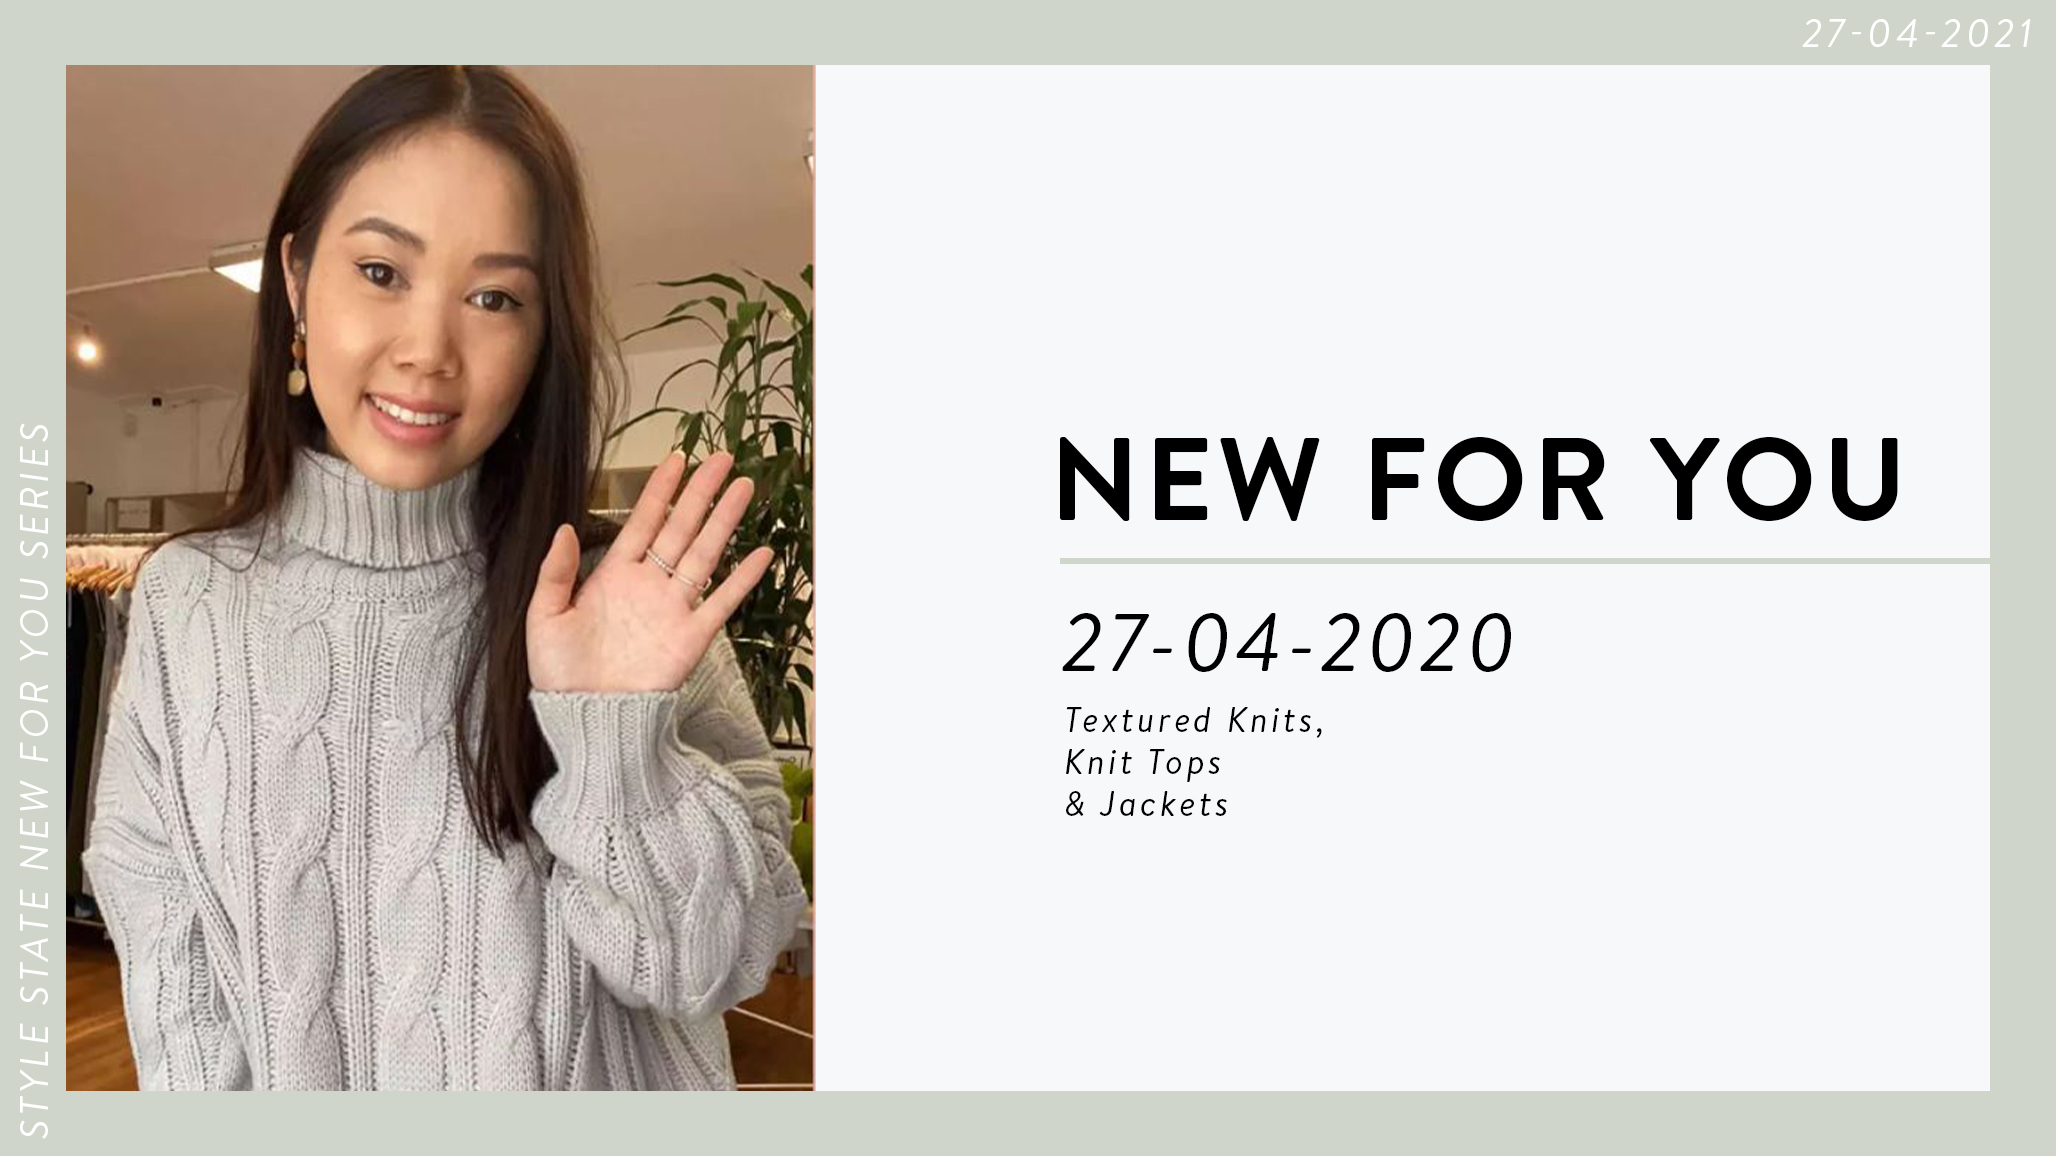 NEW FOR YOU 27.04.2020